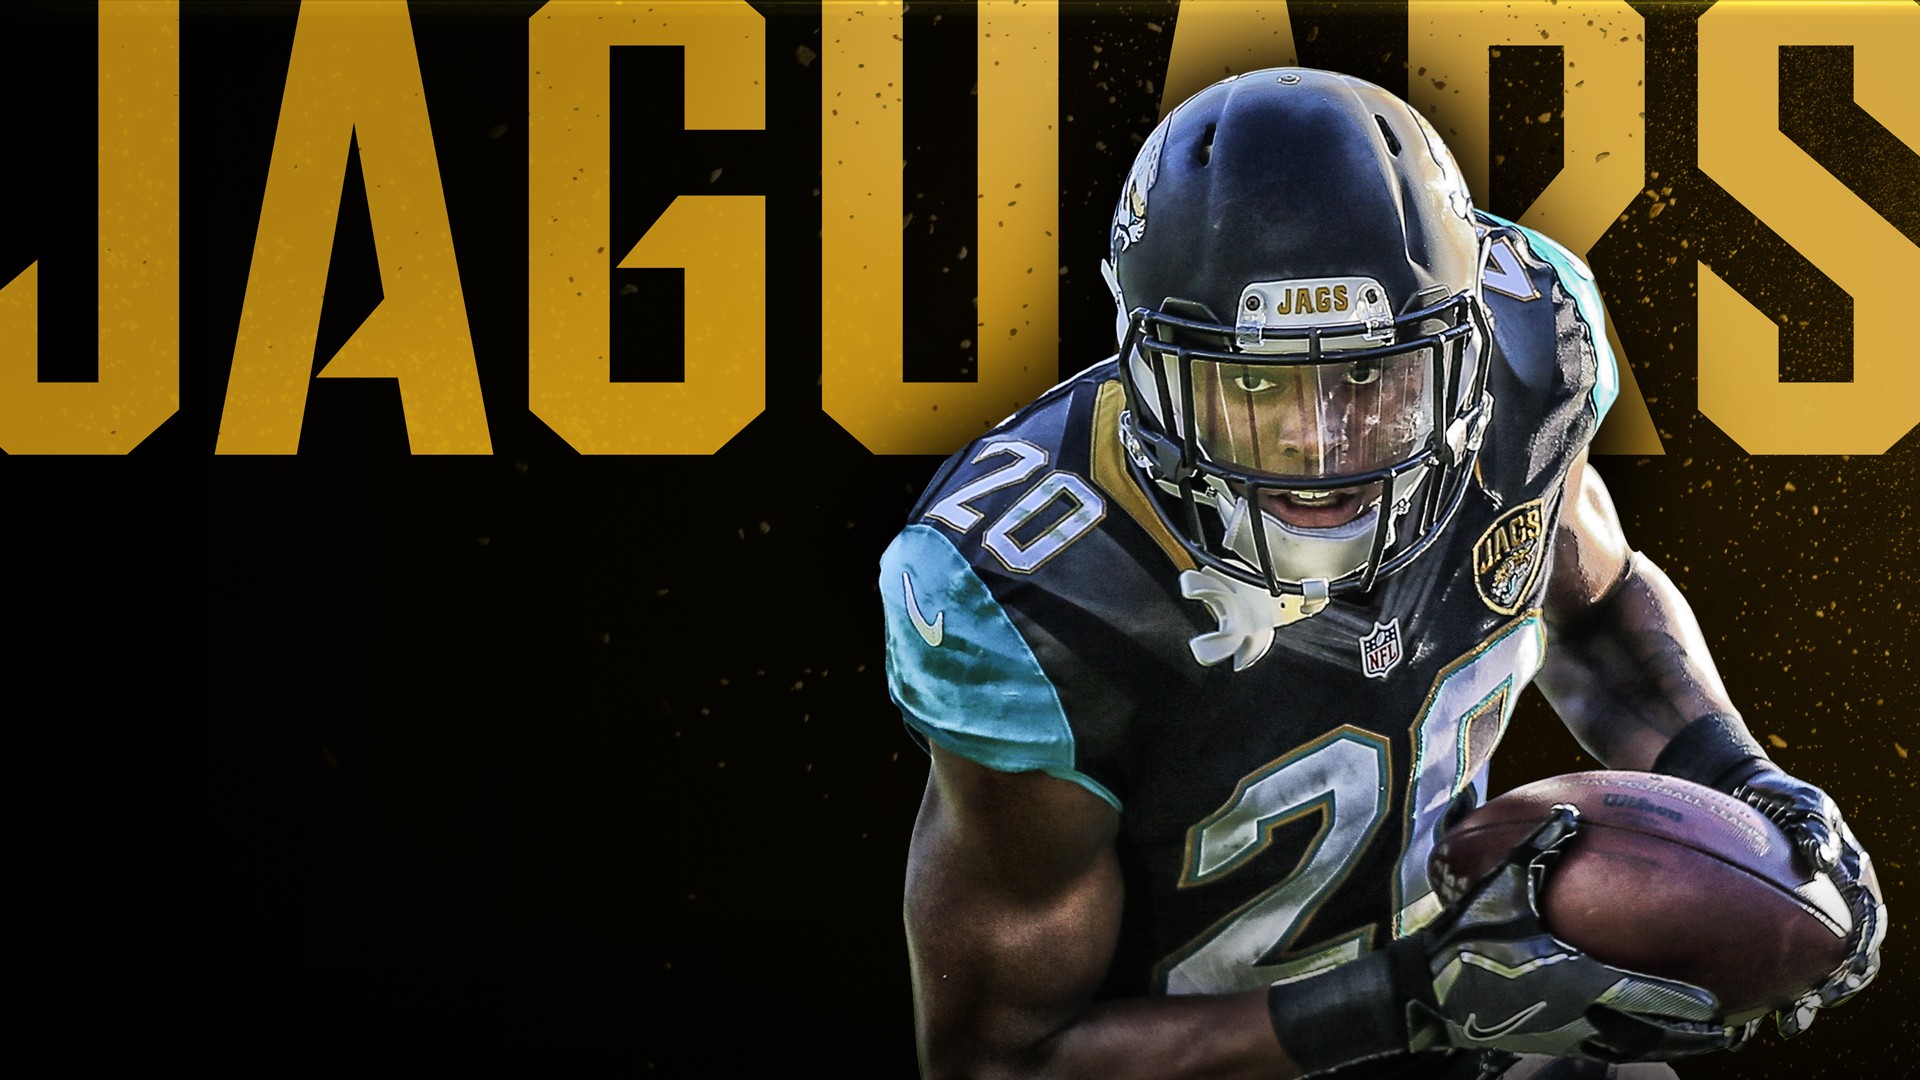 Jacksonville Jaguars Wallpaper For Mac Backgrounds with resolution 1920x1080 pixel. You can make this wallpaper for your Mac or Windows Desktop Background, iPhone, Android or Tablet and another Smartphone device